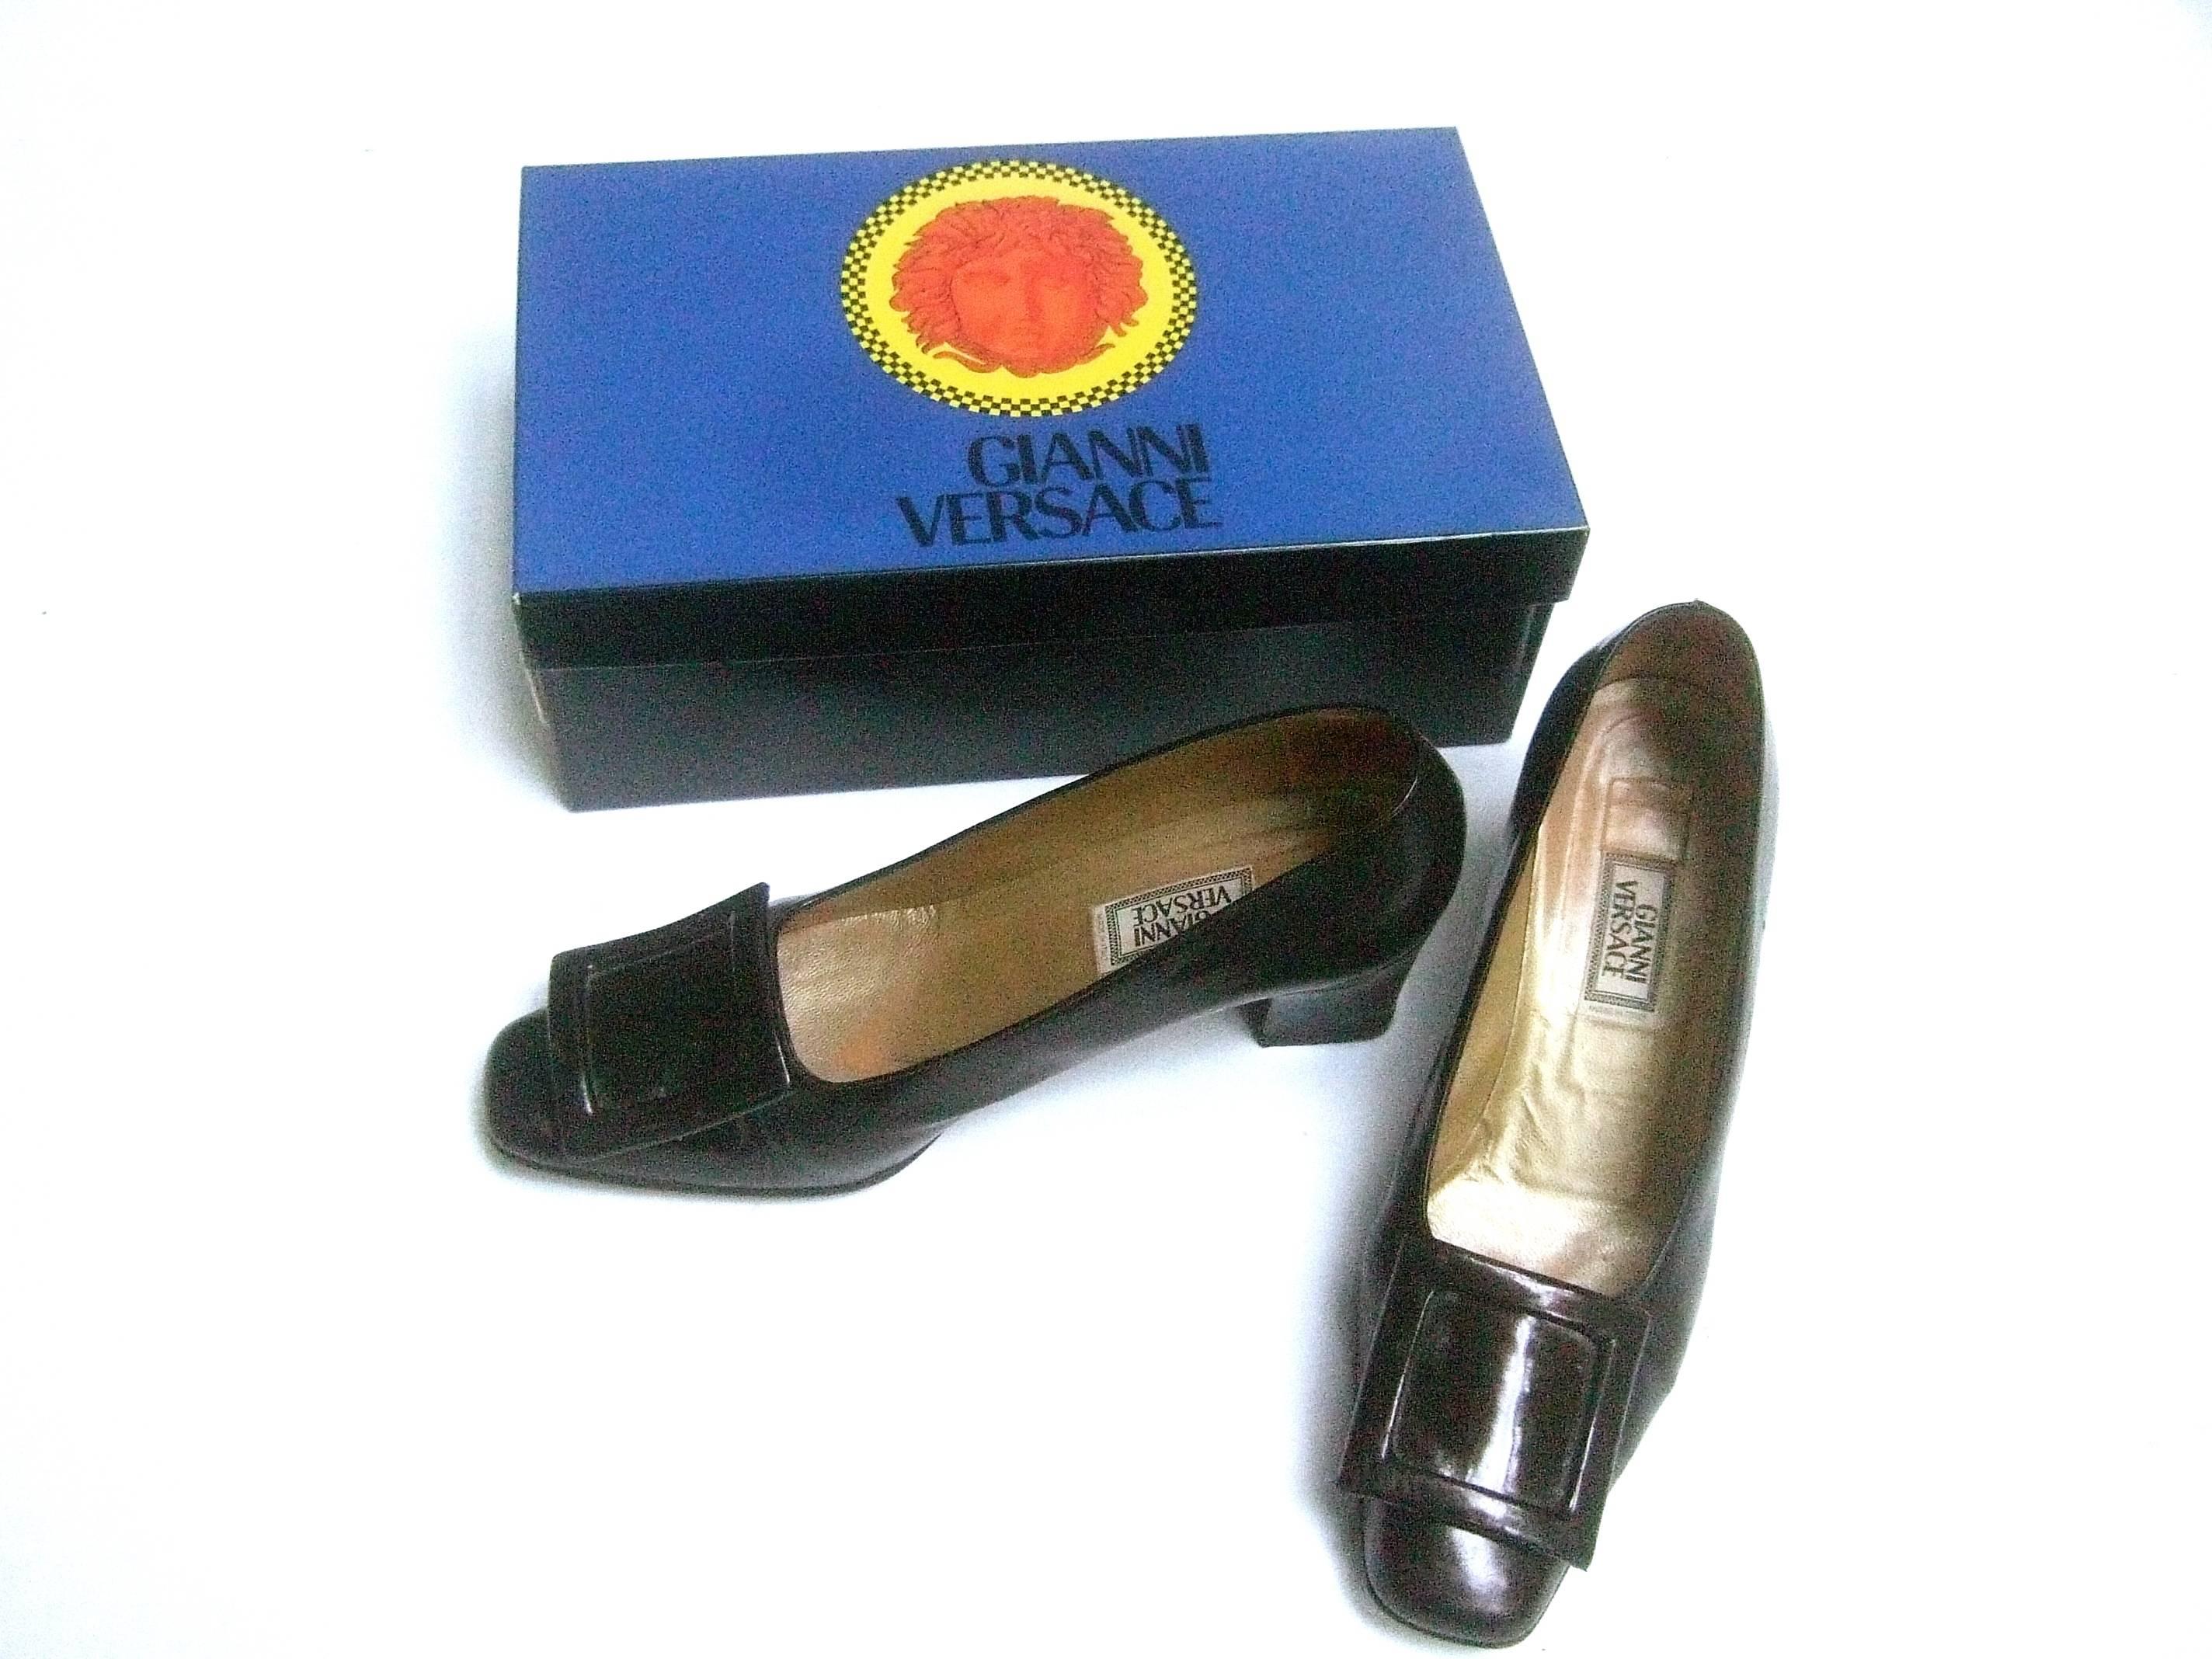 Versace brown leather pumps in Versace box Size 39 
The stylish Italian pumps are covered with glossy 
chocolate brown leather 

Designed with a matching square buckle on the front
of each shoe

Labeled: Gianni Versace Made in Italy 

Italian Size